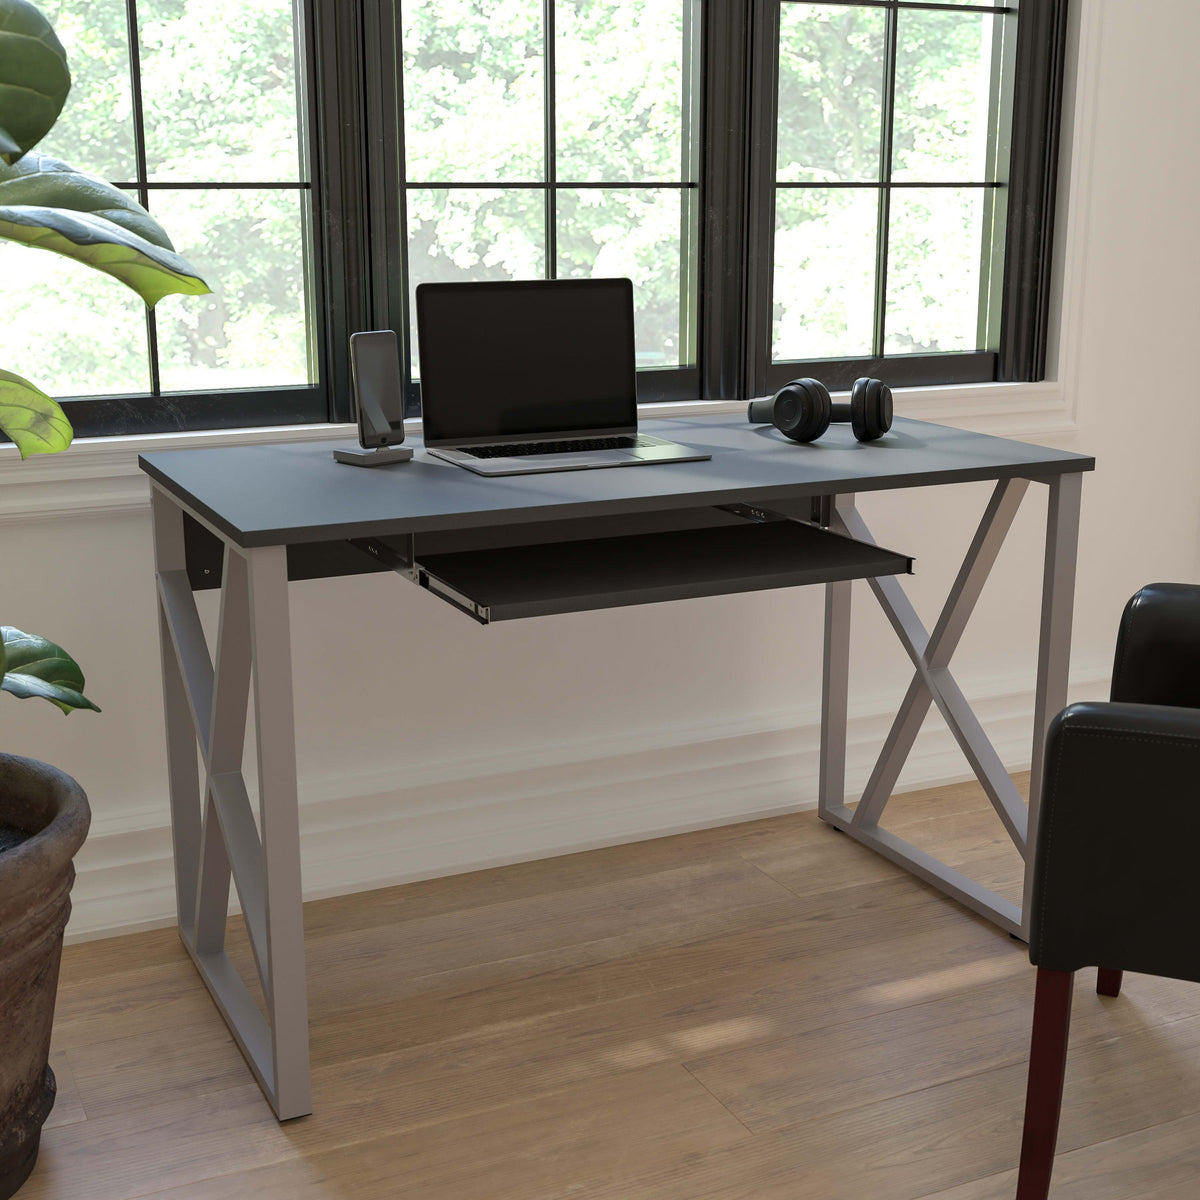 Black Computer Desk with Pull-Out Keyboard Tray and Cross-Brace Frame